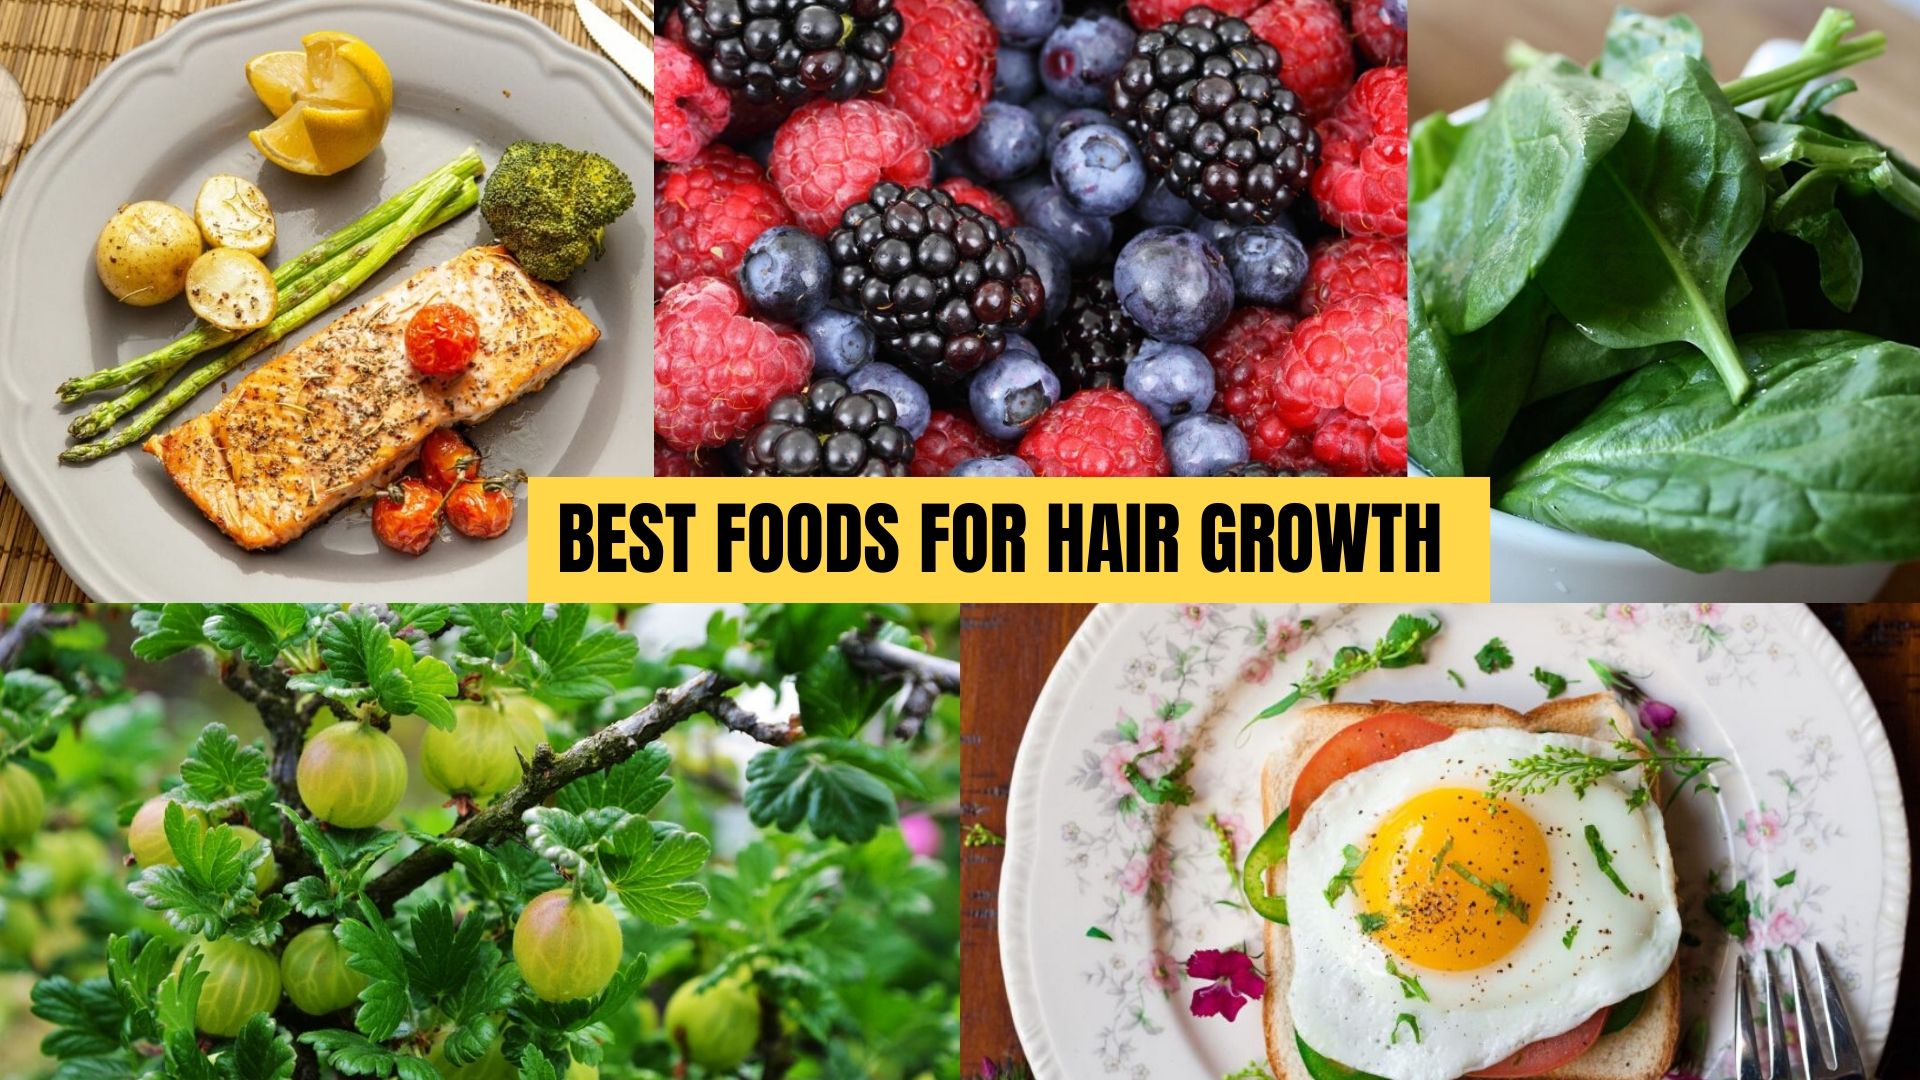 Blog about all you can find | Hair food, Cool hairstyles, Good healthy  snacks